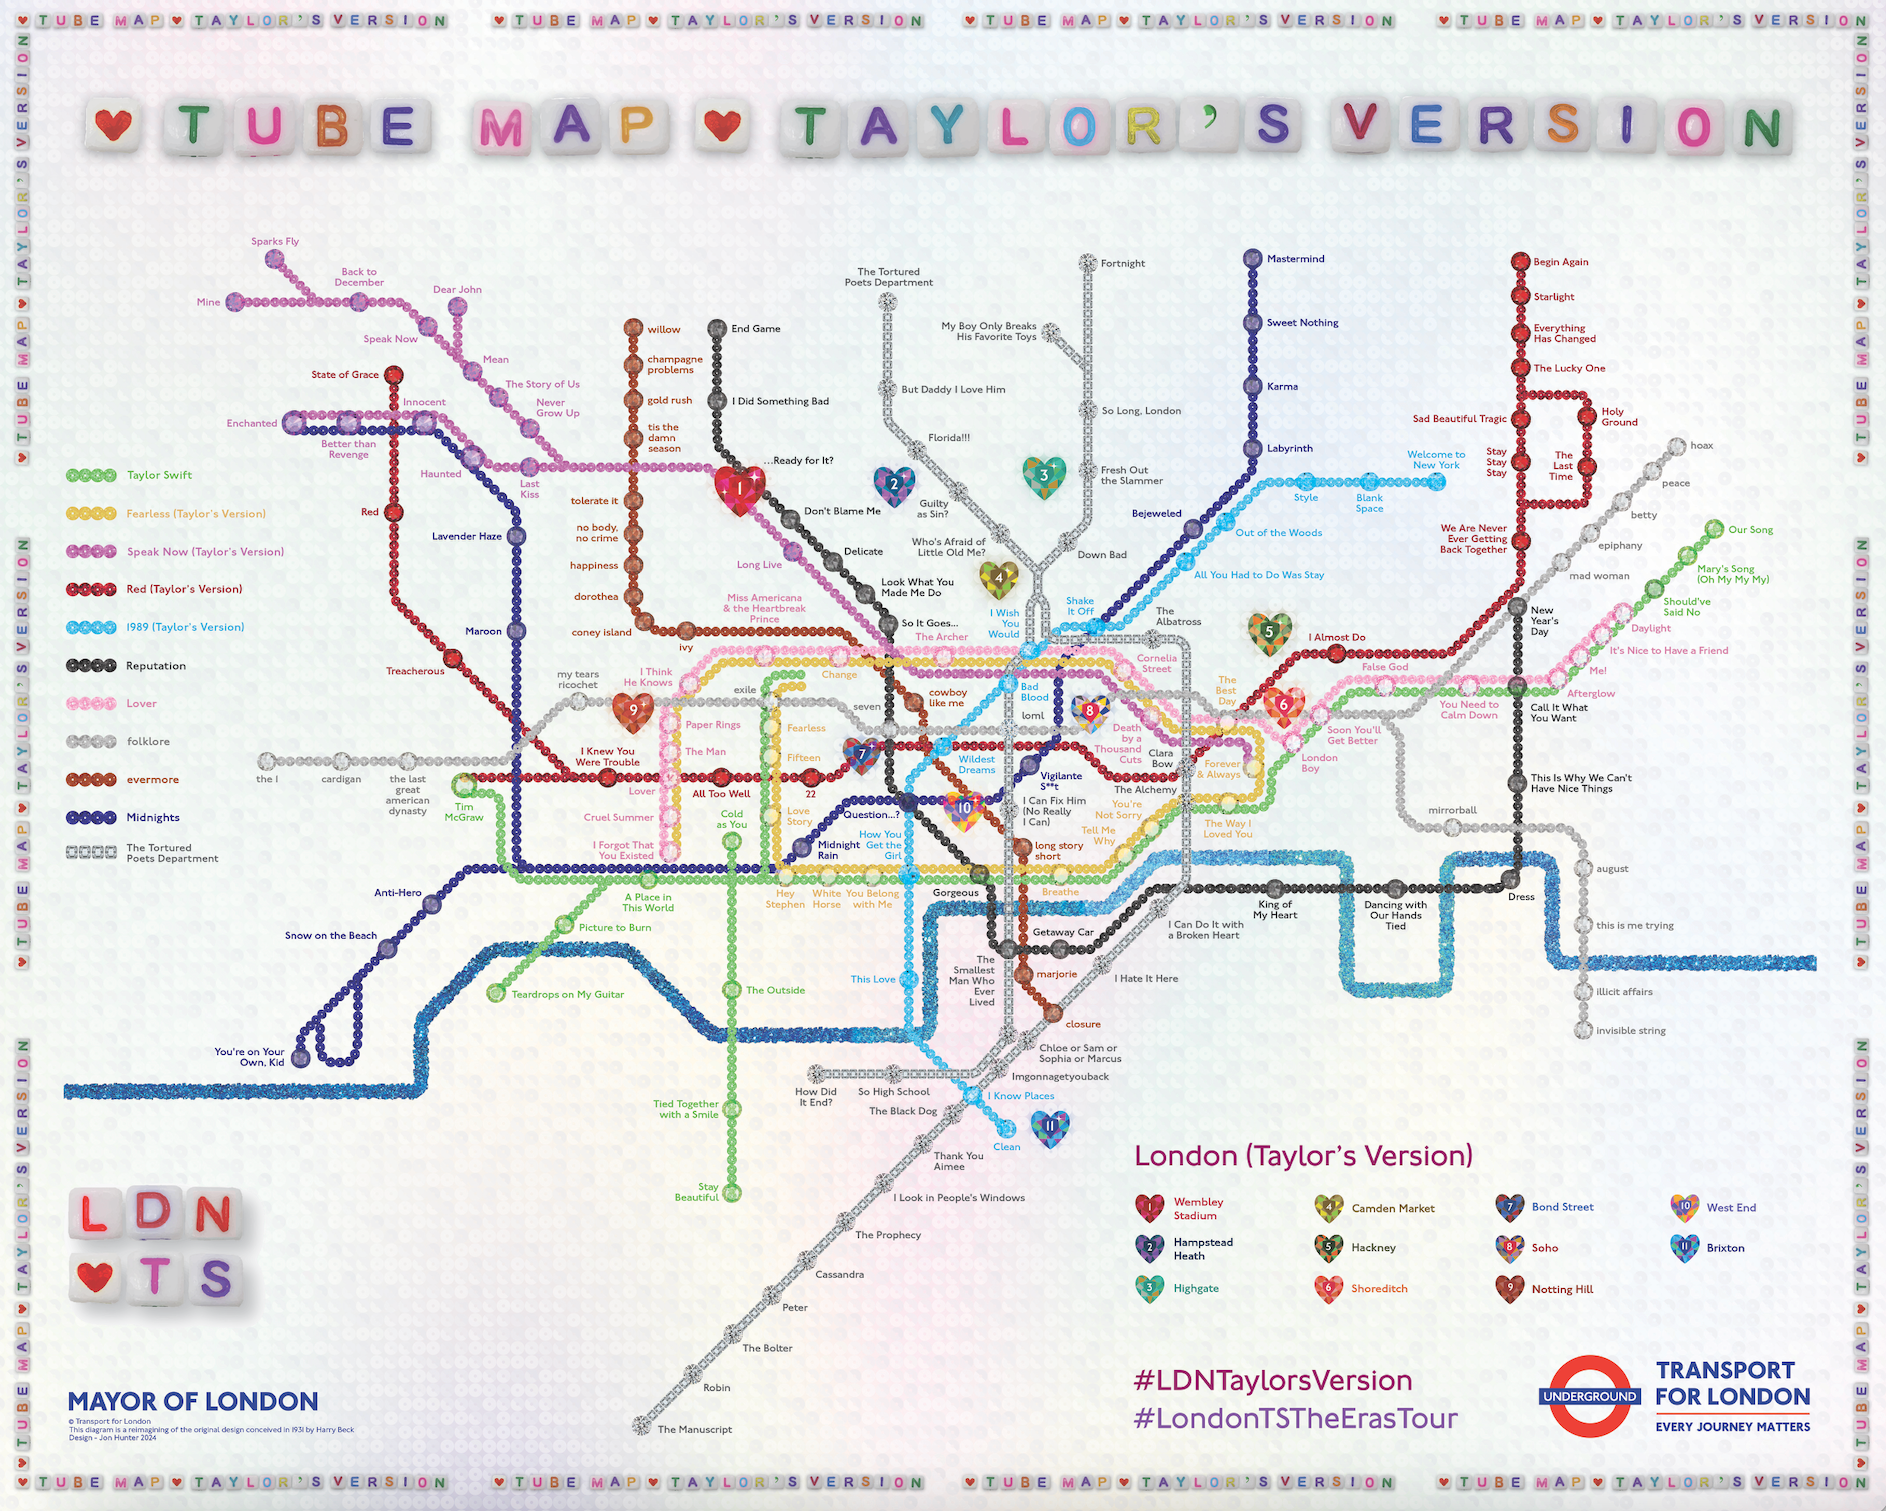 TfL have reimagined the London underground map